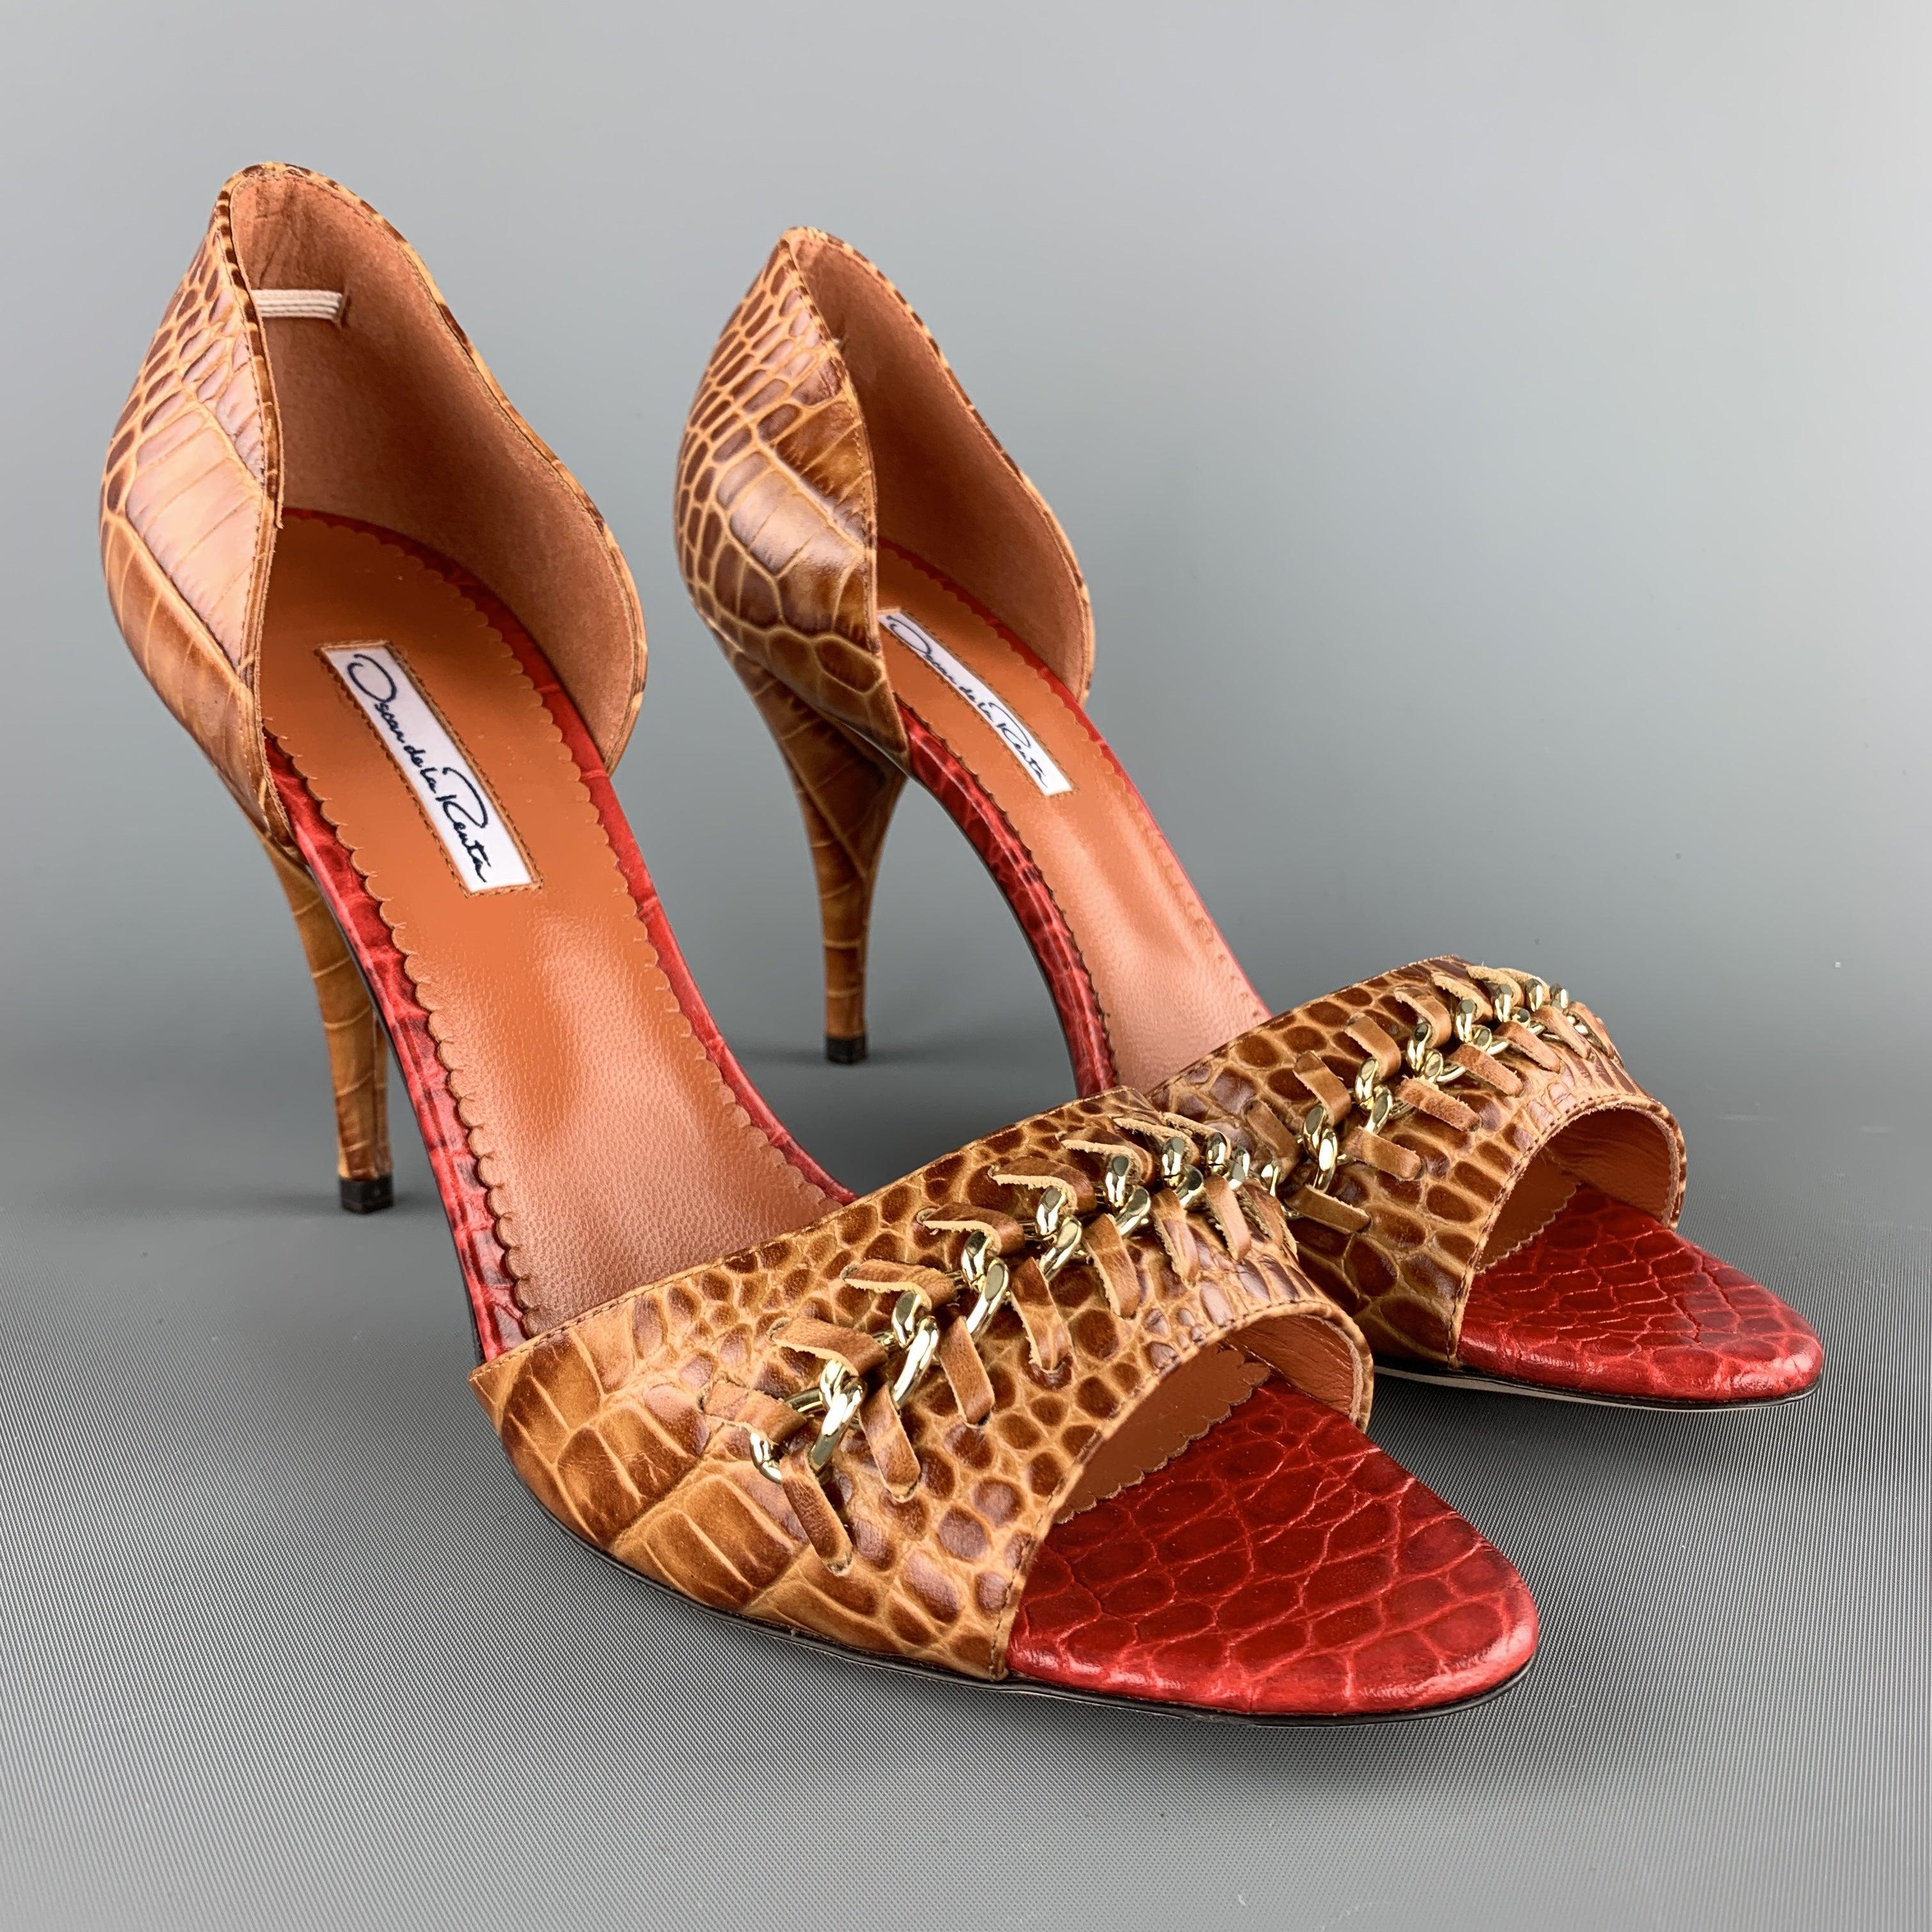 OSCAR DE LA RENTA D'orsay pumps come in tan alligator embossed leather with a peep toe, covered cone heel, red embossed leather insole, and gold tone chain woven toe strap accent. Made in Italy.New with Box.
 

Marked:   IT 40Heel:
4.25 inches 
  
 